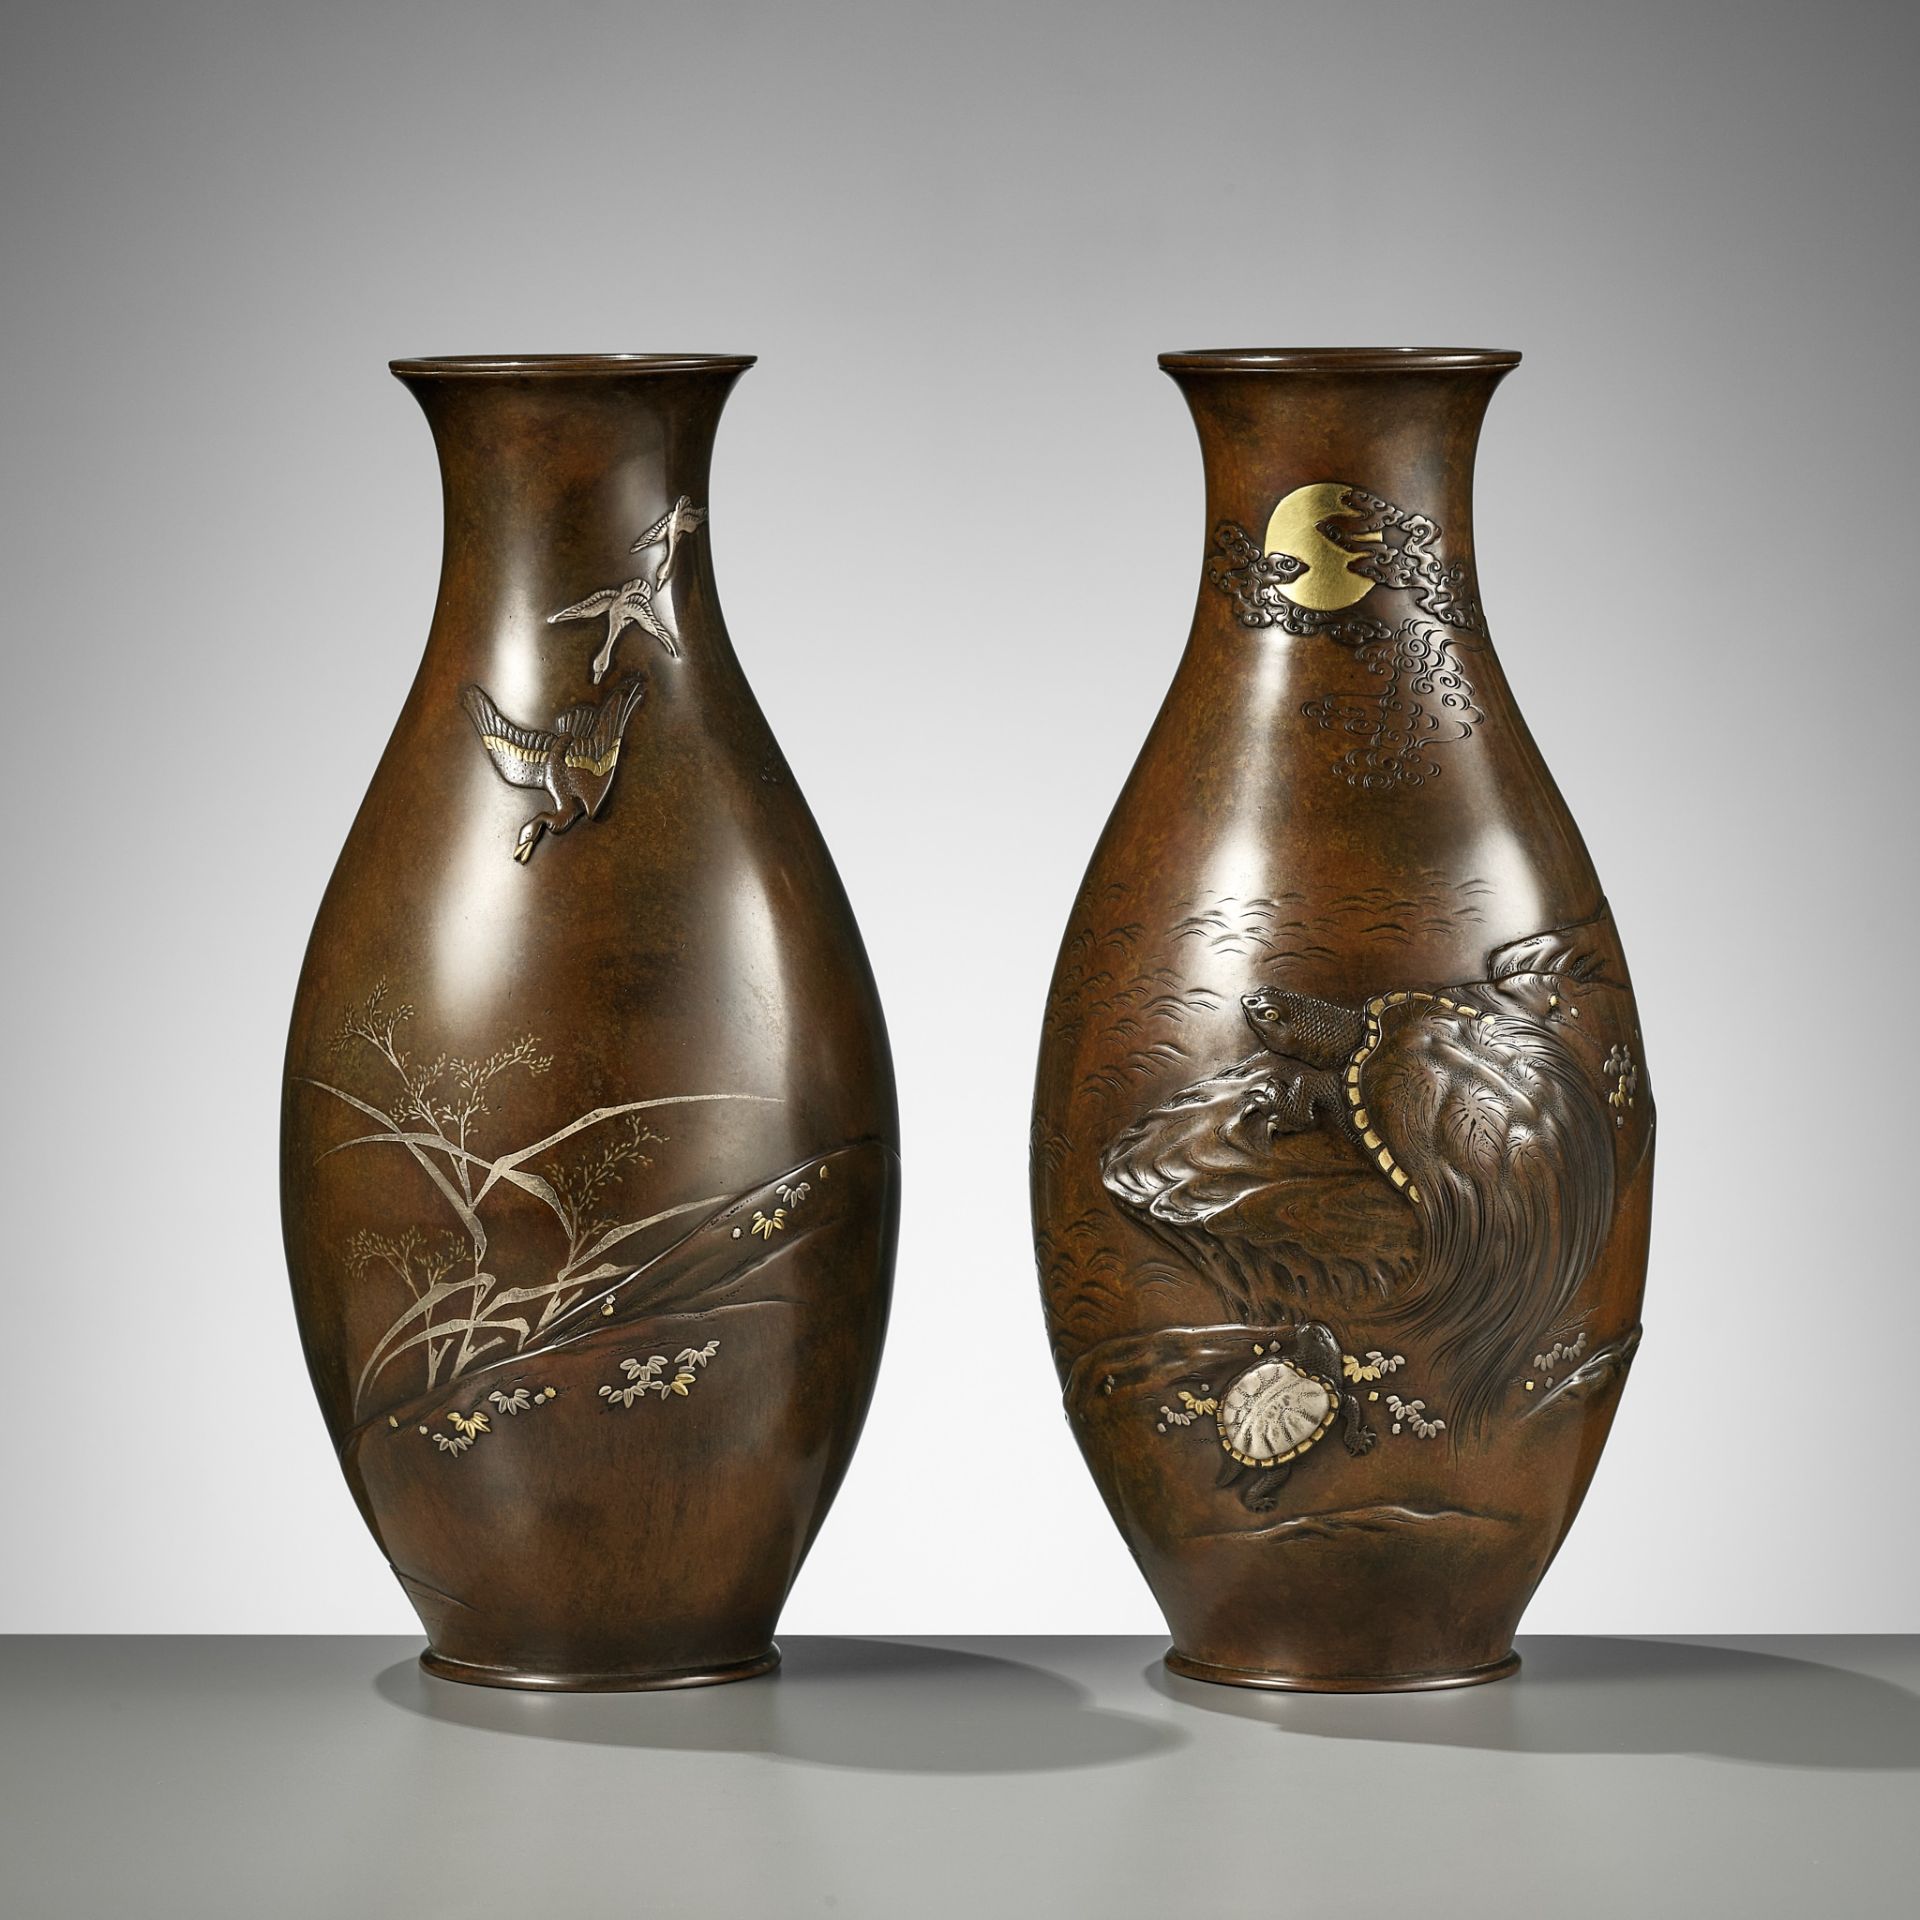 CHOMIN: A SUPERB PAIR OF INLAID BRONZE VASES WITH MINOGAME AND GEESE